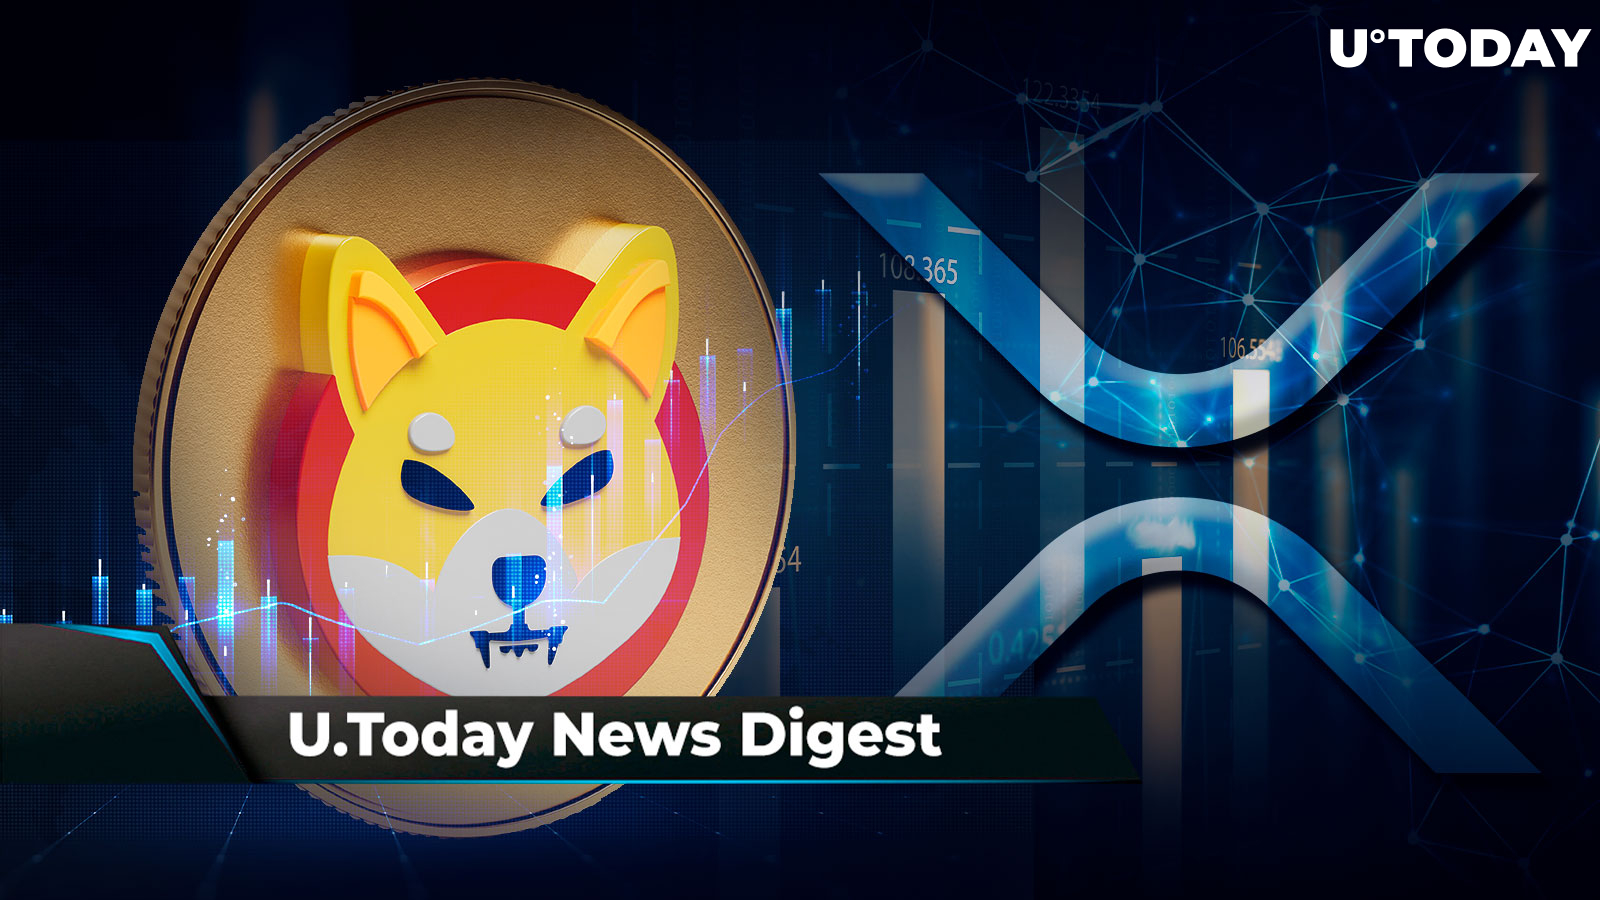 SHIB Shows Unseen Price Performance, Jim Roberts Says Crypto Will Become “Government Money,” XRP on Cusp of Breakout: Crypto News Digest by U.Today